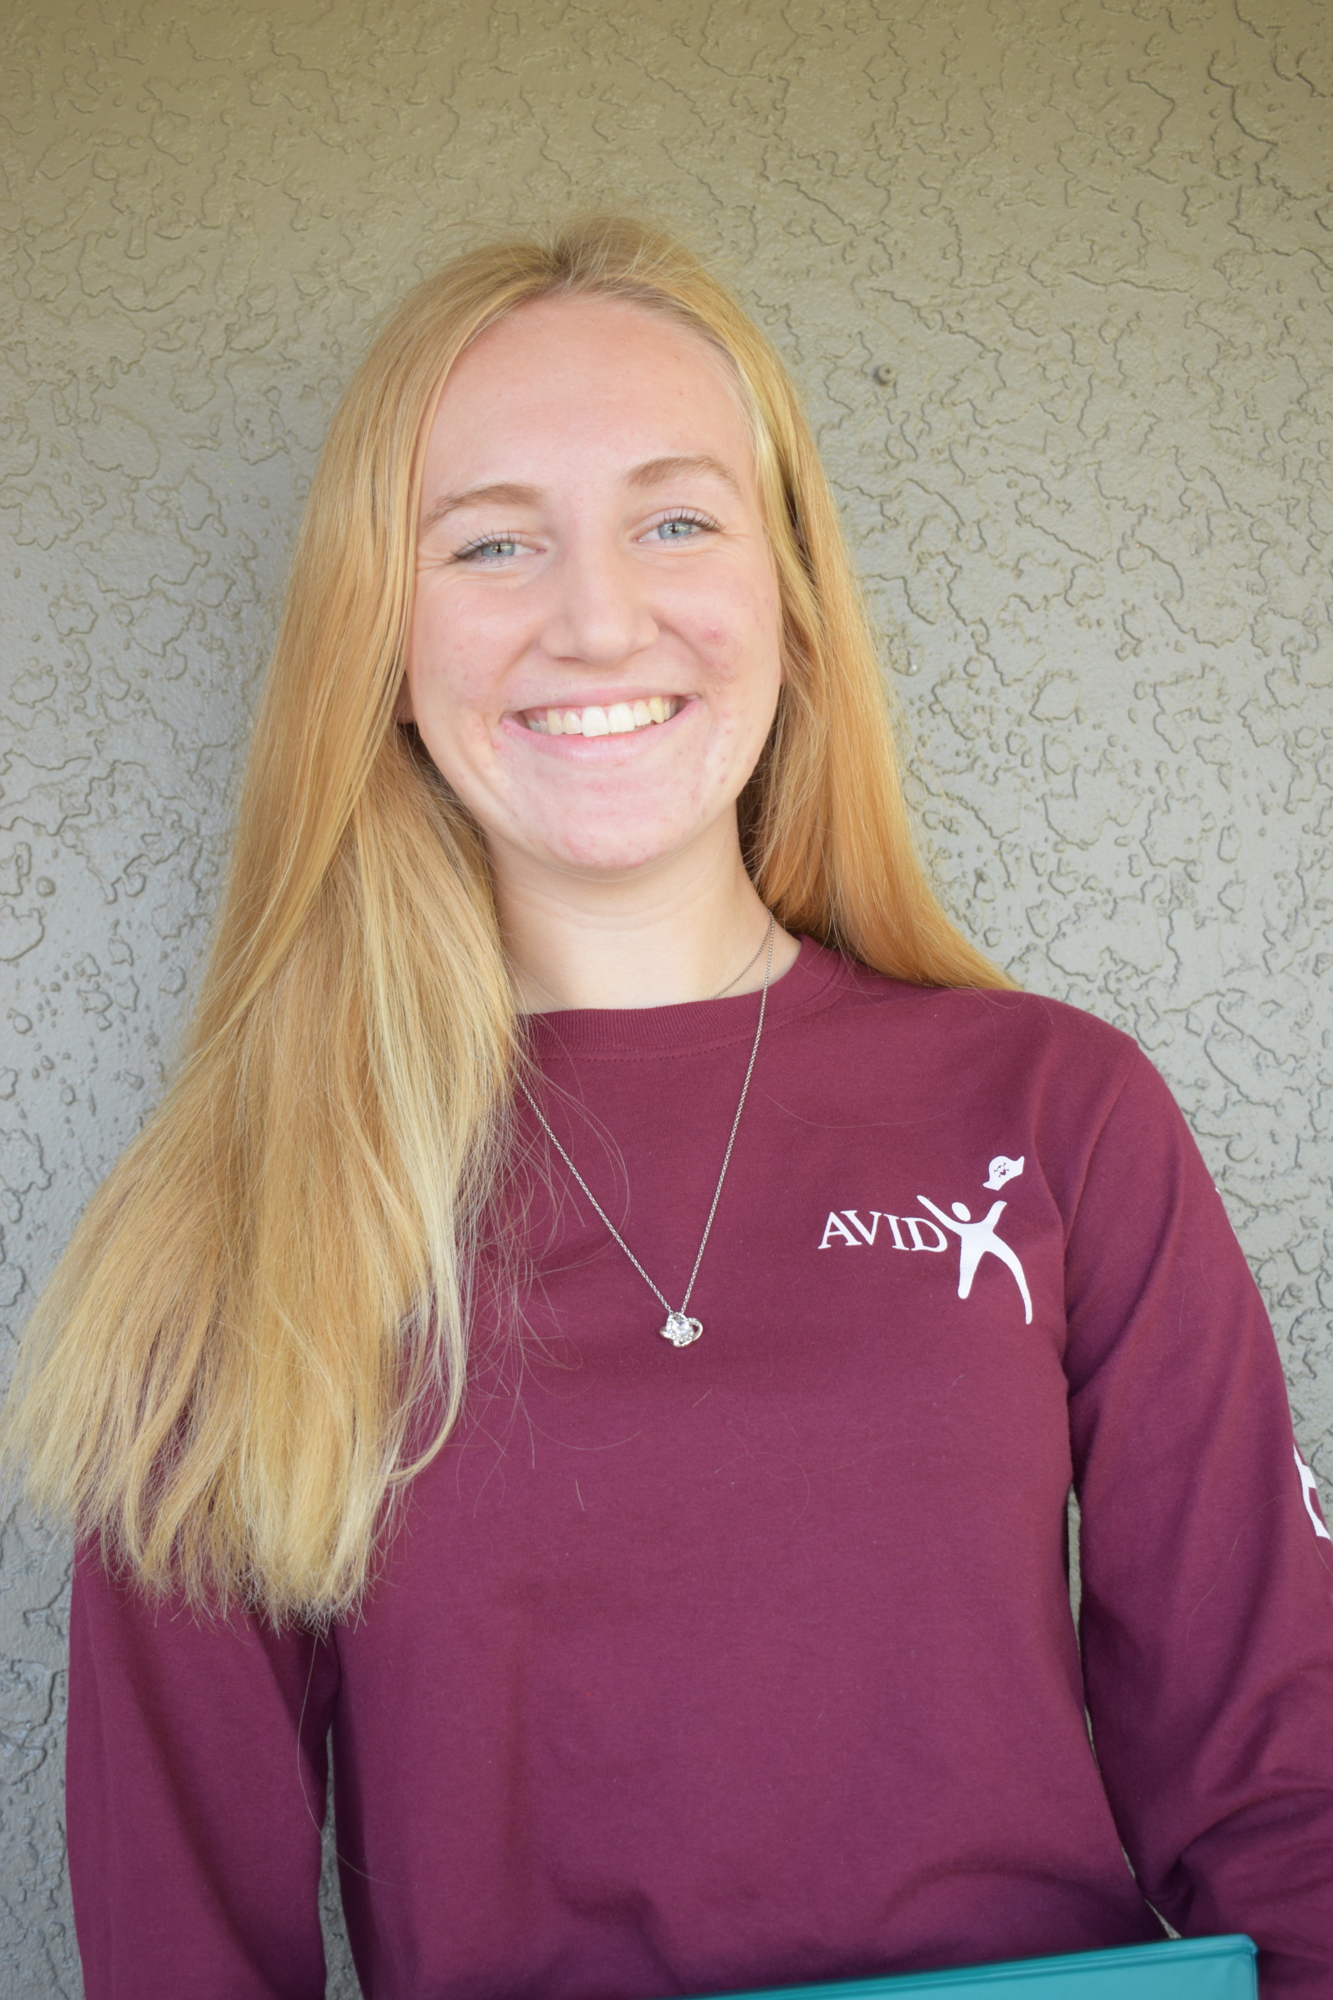 Kaylee Cooper, a senior at Braden River High School, has been in the AVID program since she was in seventh grade.